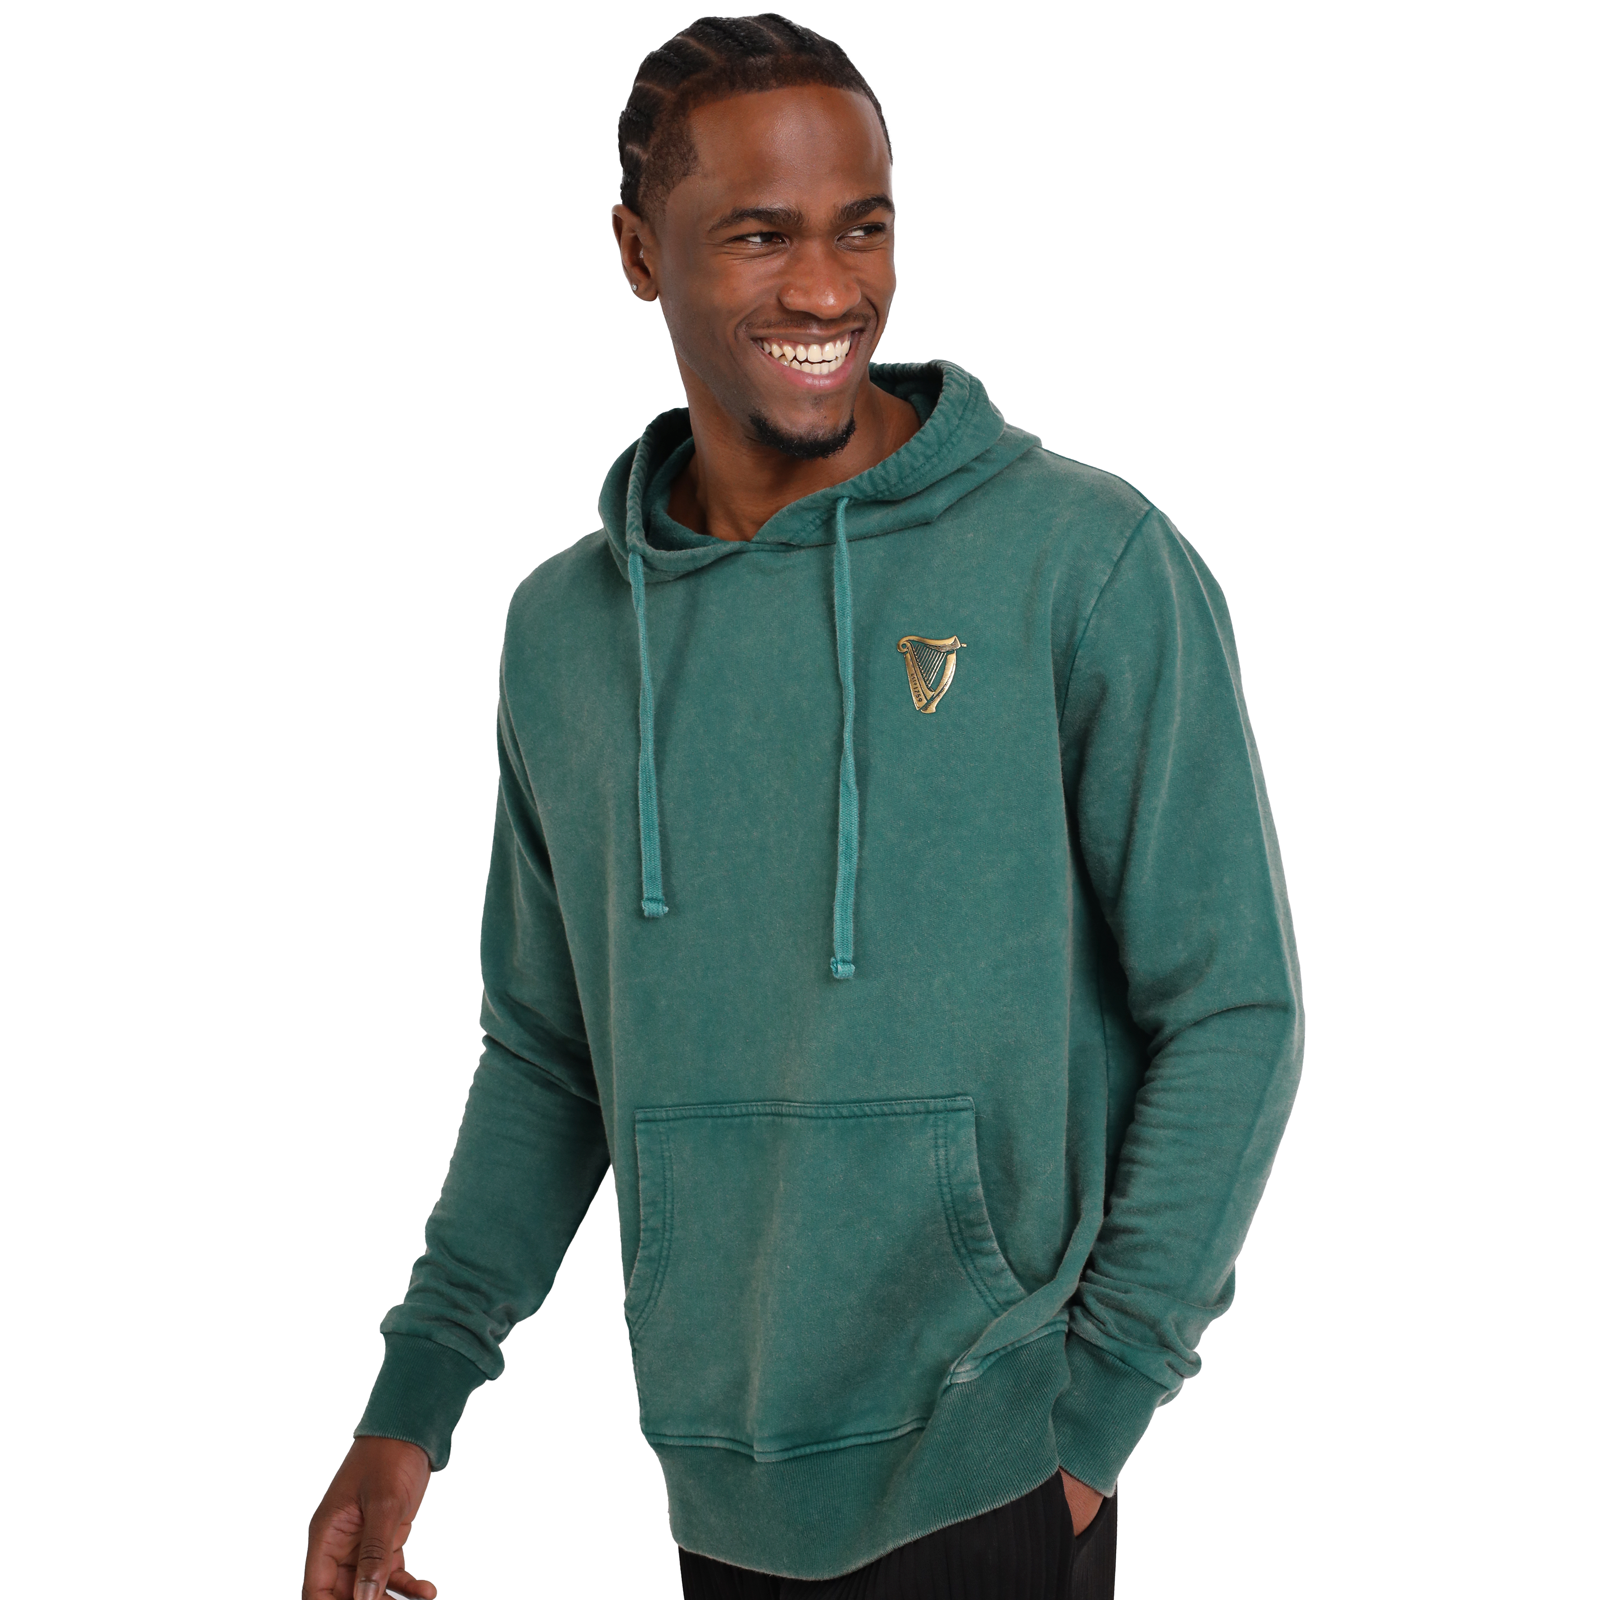 A man wearing a Guinness Forest Green & Gold Toucan Hoodie with the Ireland crest, combining comfort and sustainability.